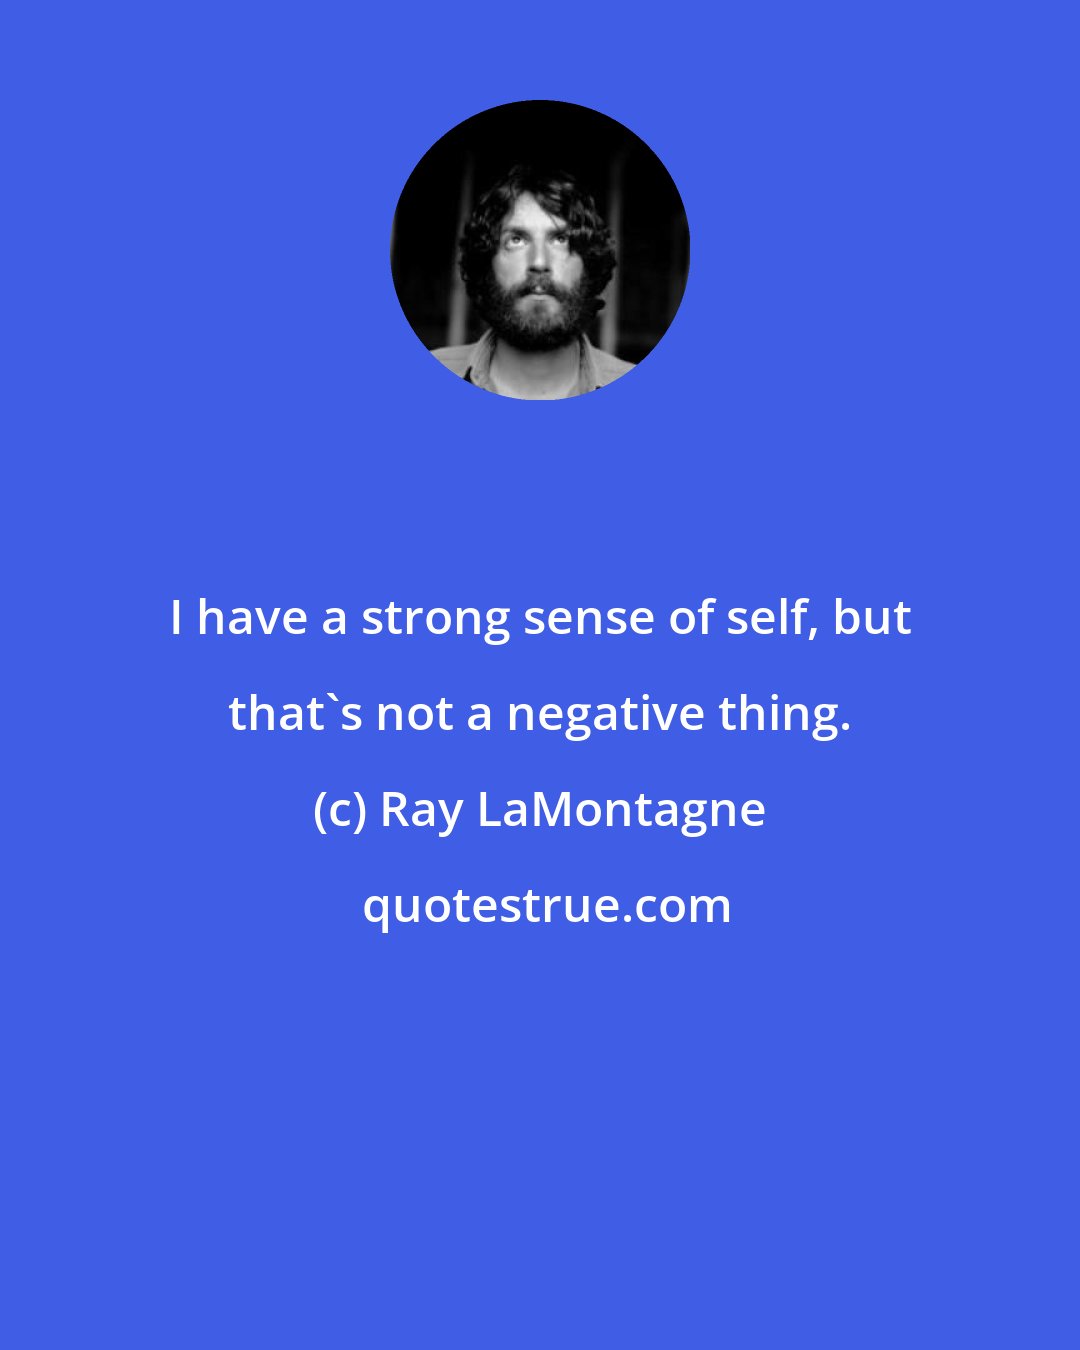 Ray LaMontagne: I have a strong sense of self, but that's not a negative thing.